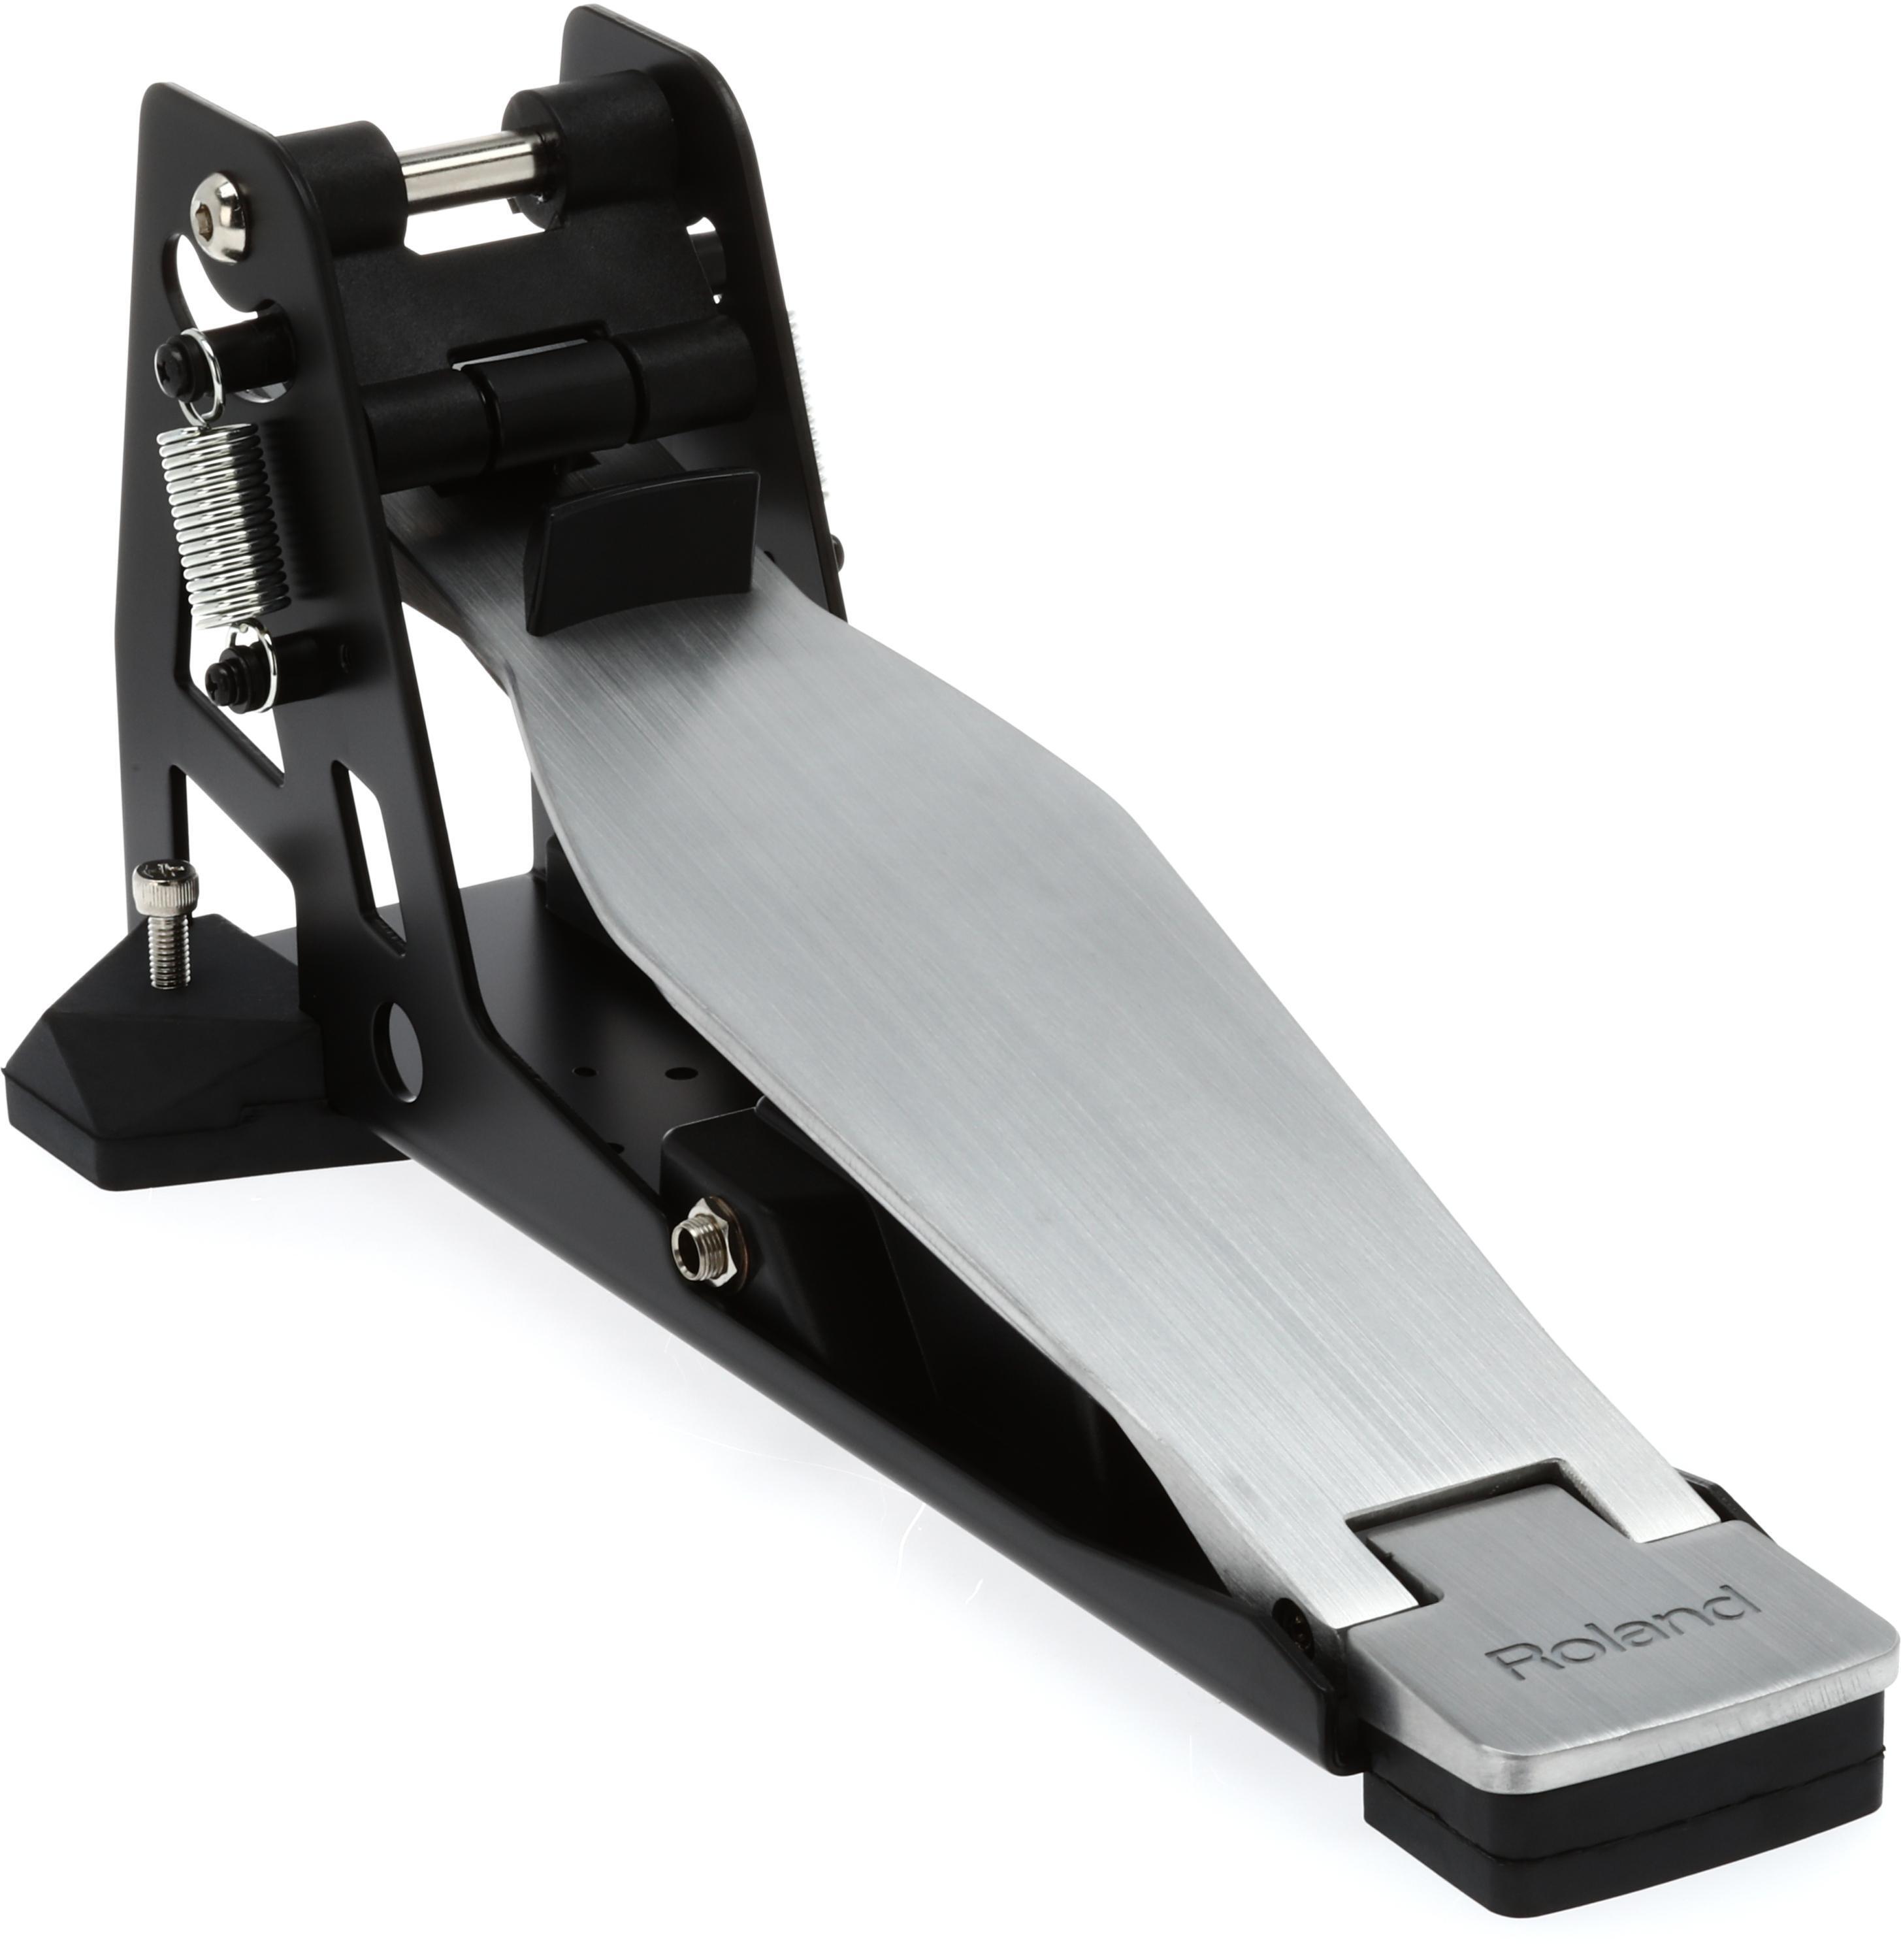 Roland FD-9 Hi-hat Control Pedal Reviews | Sweetwater